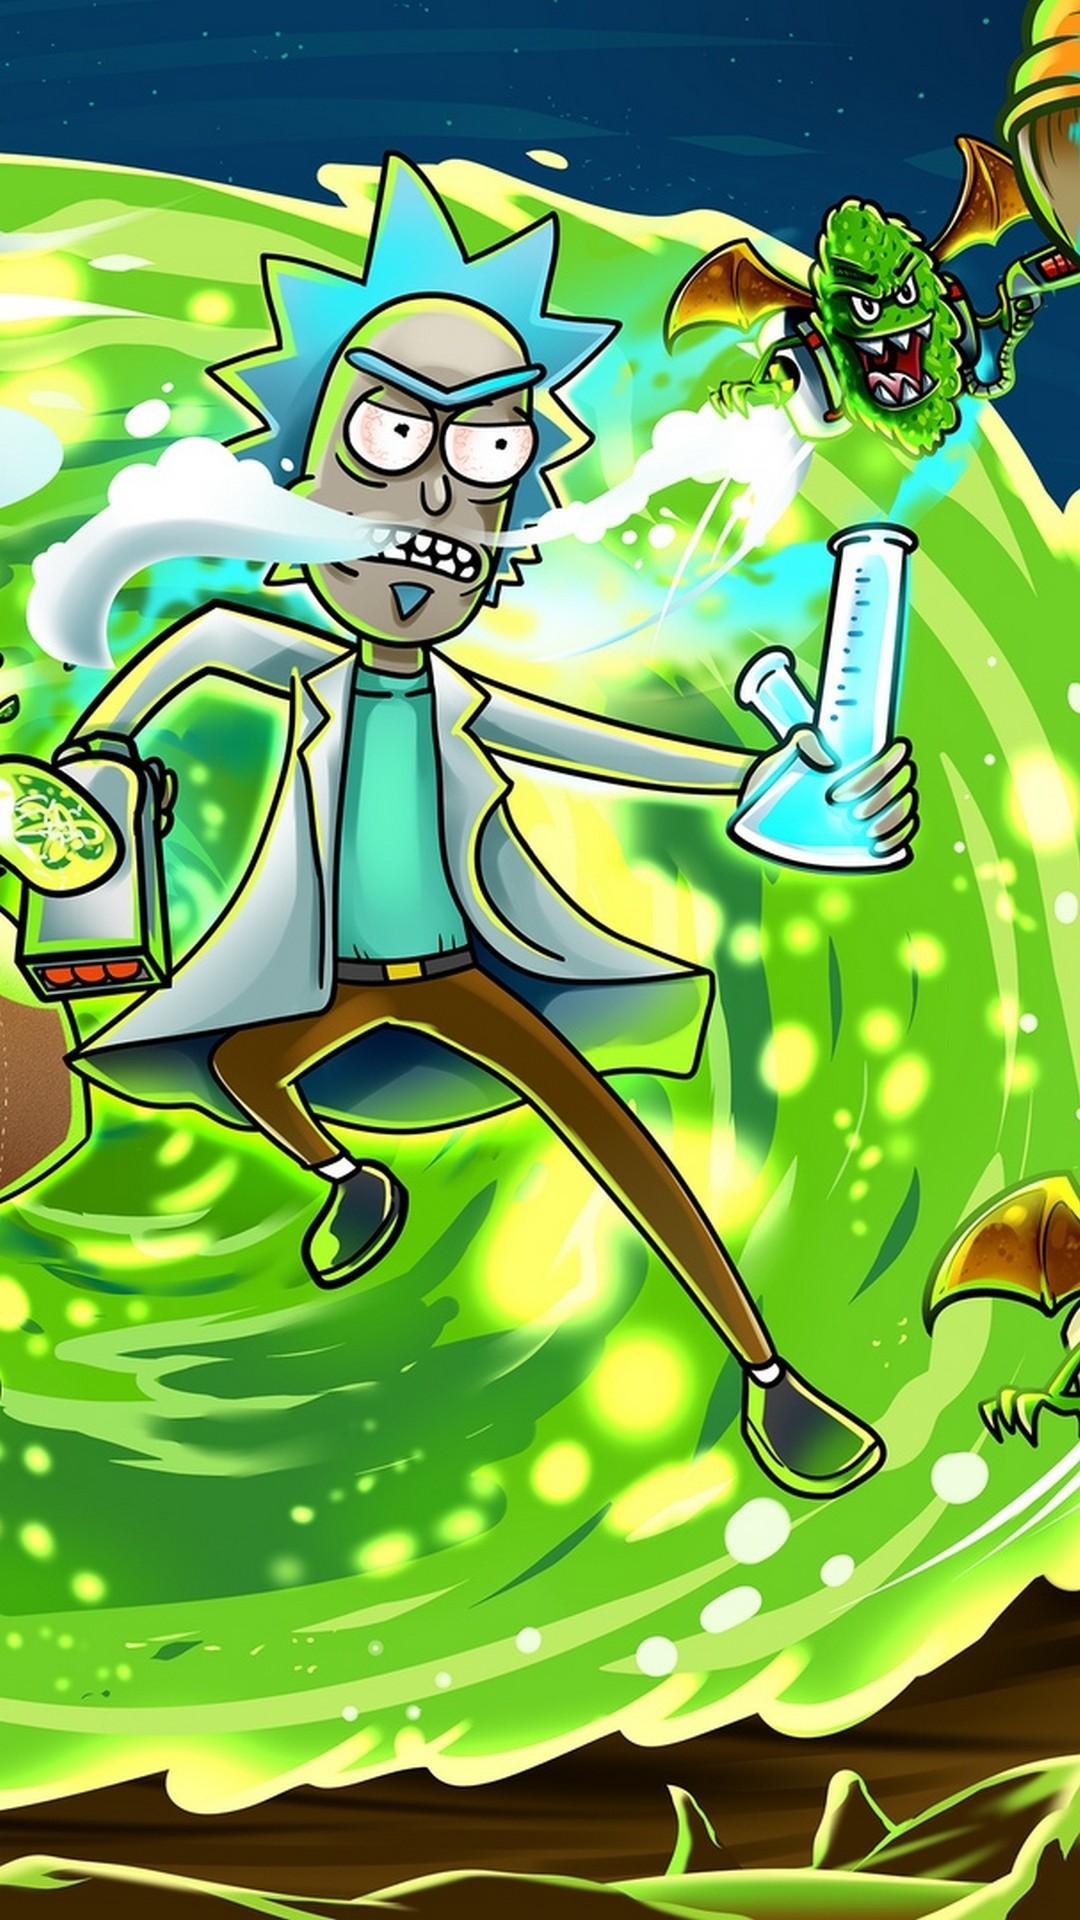 Download Rick And Morty Wallpaper, HD Backgrounds Download